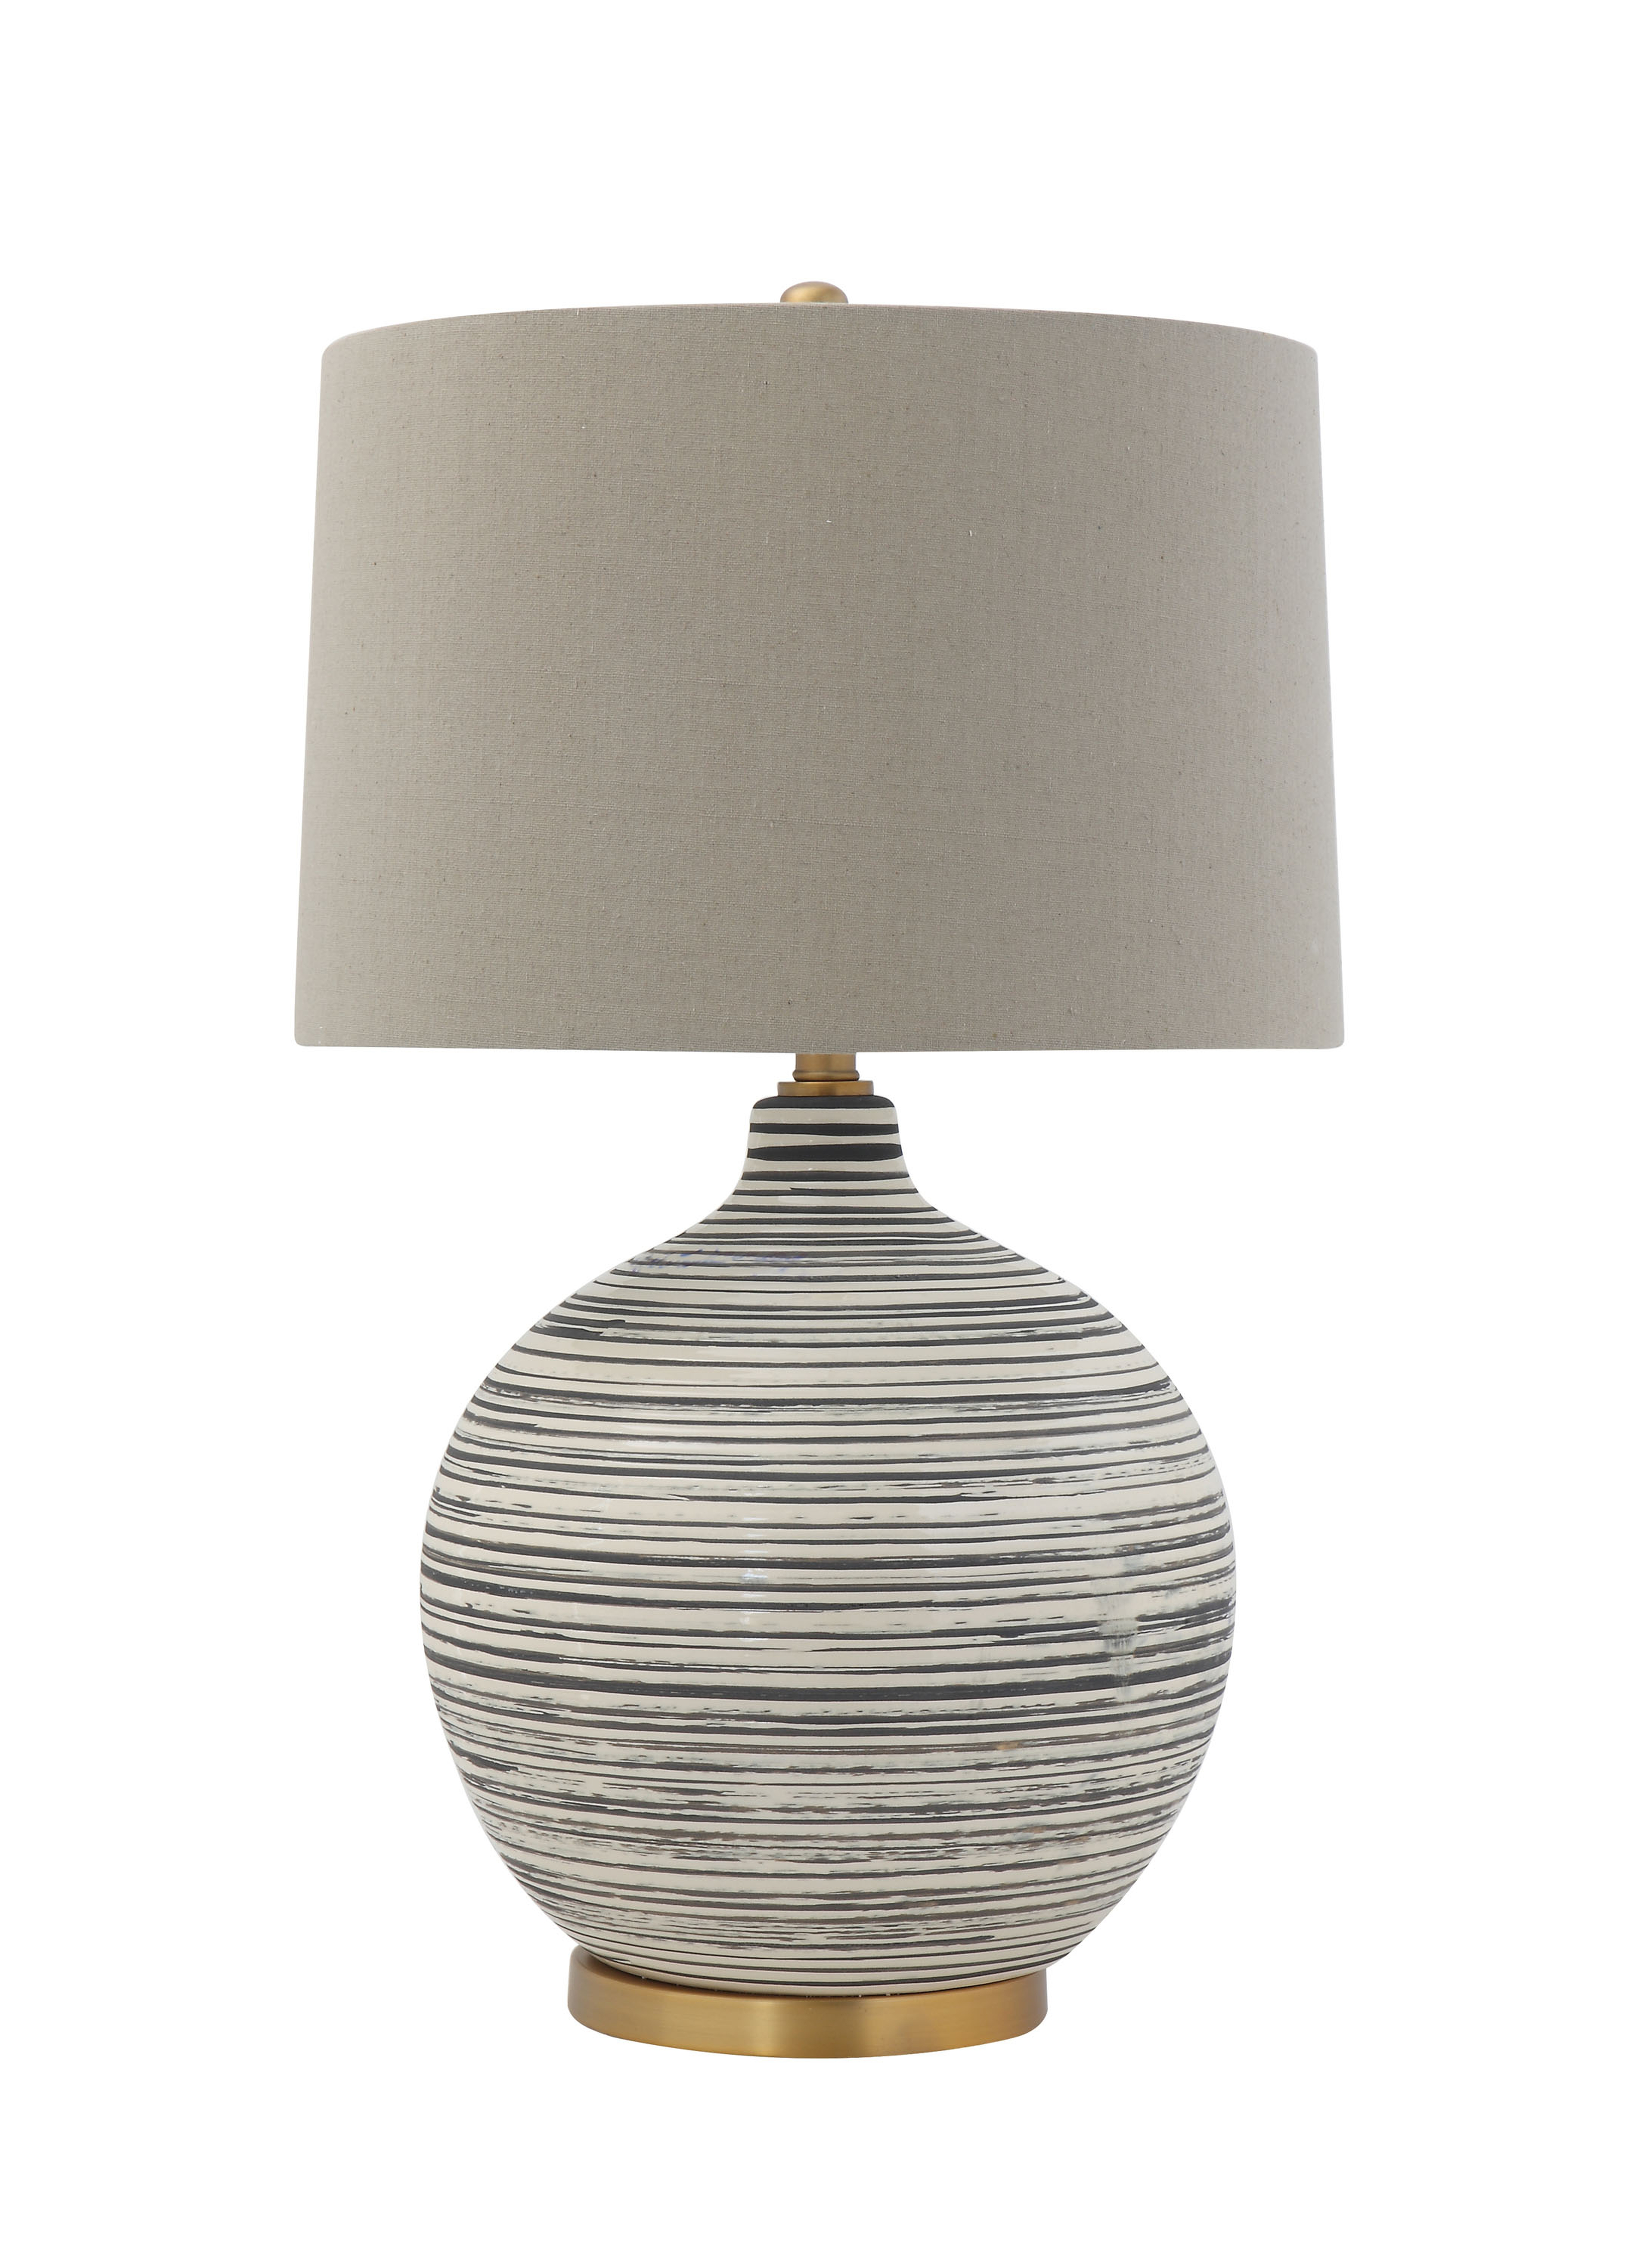 Textured Black & White Striped Ceramic Table Lamp with Grey Linen Shade - Nomad Home